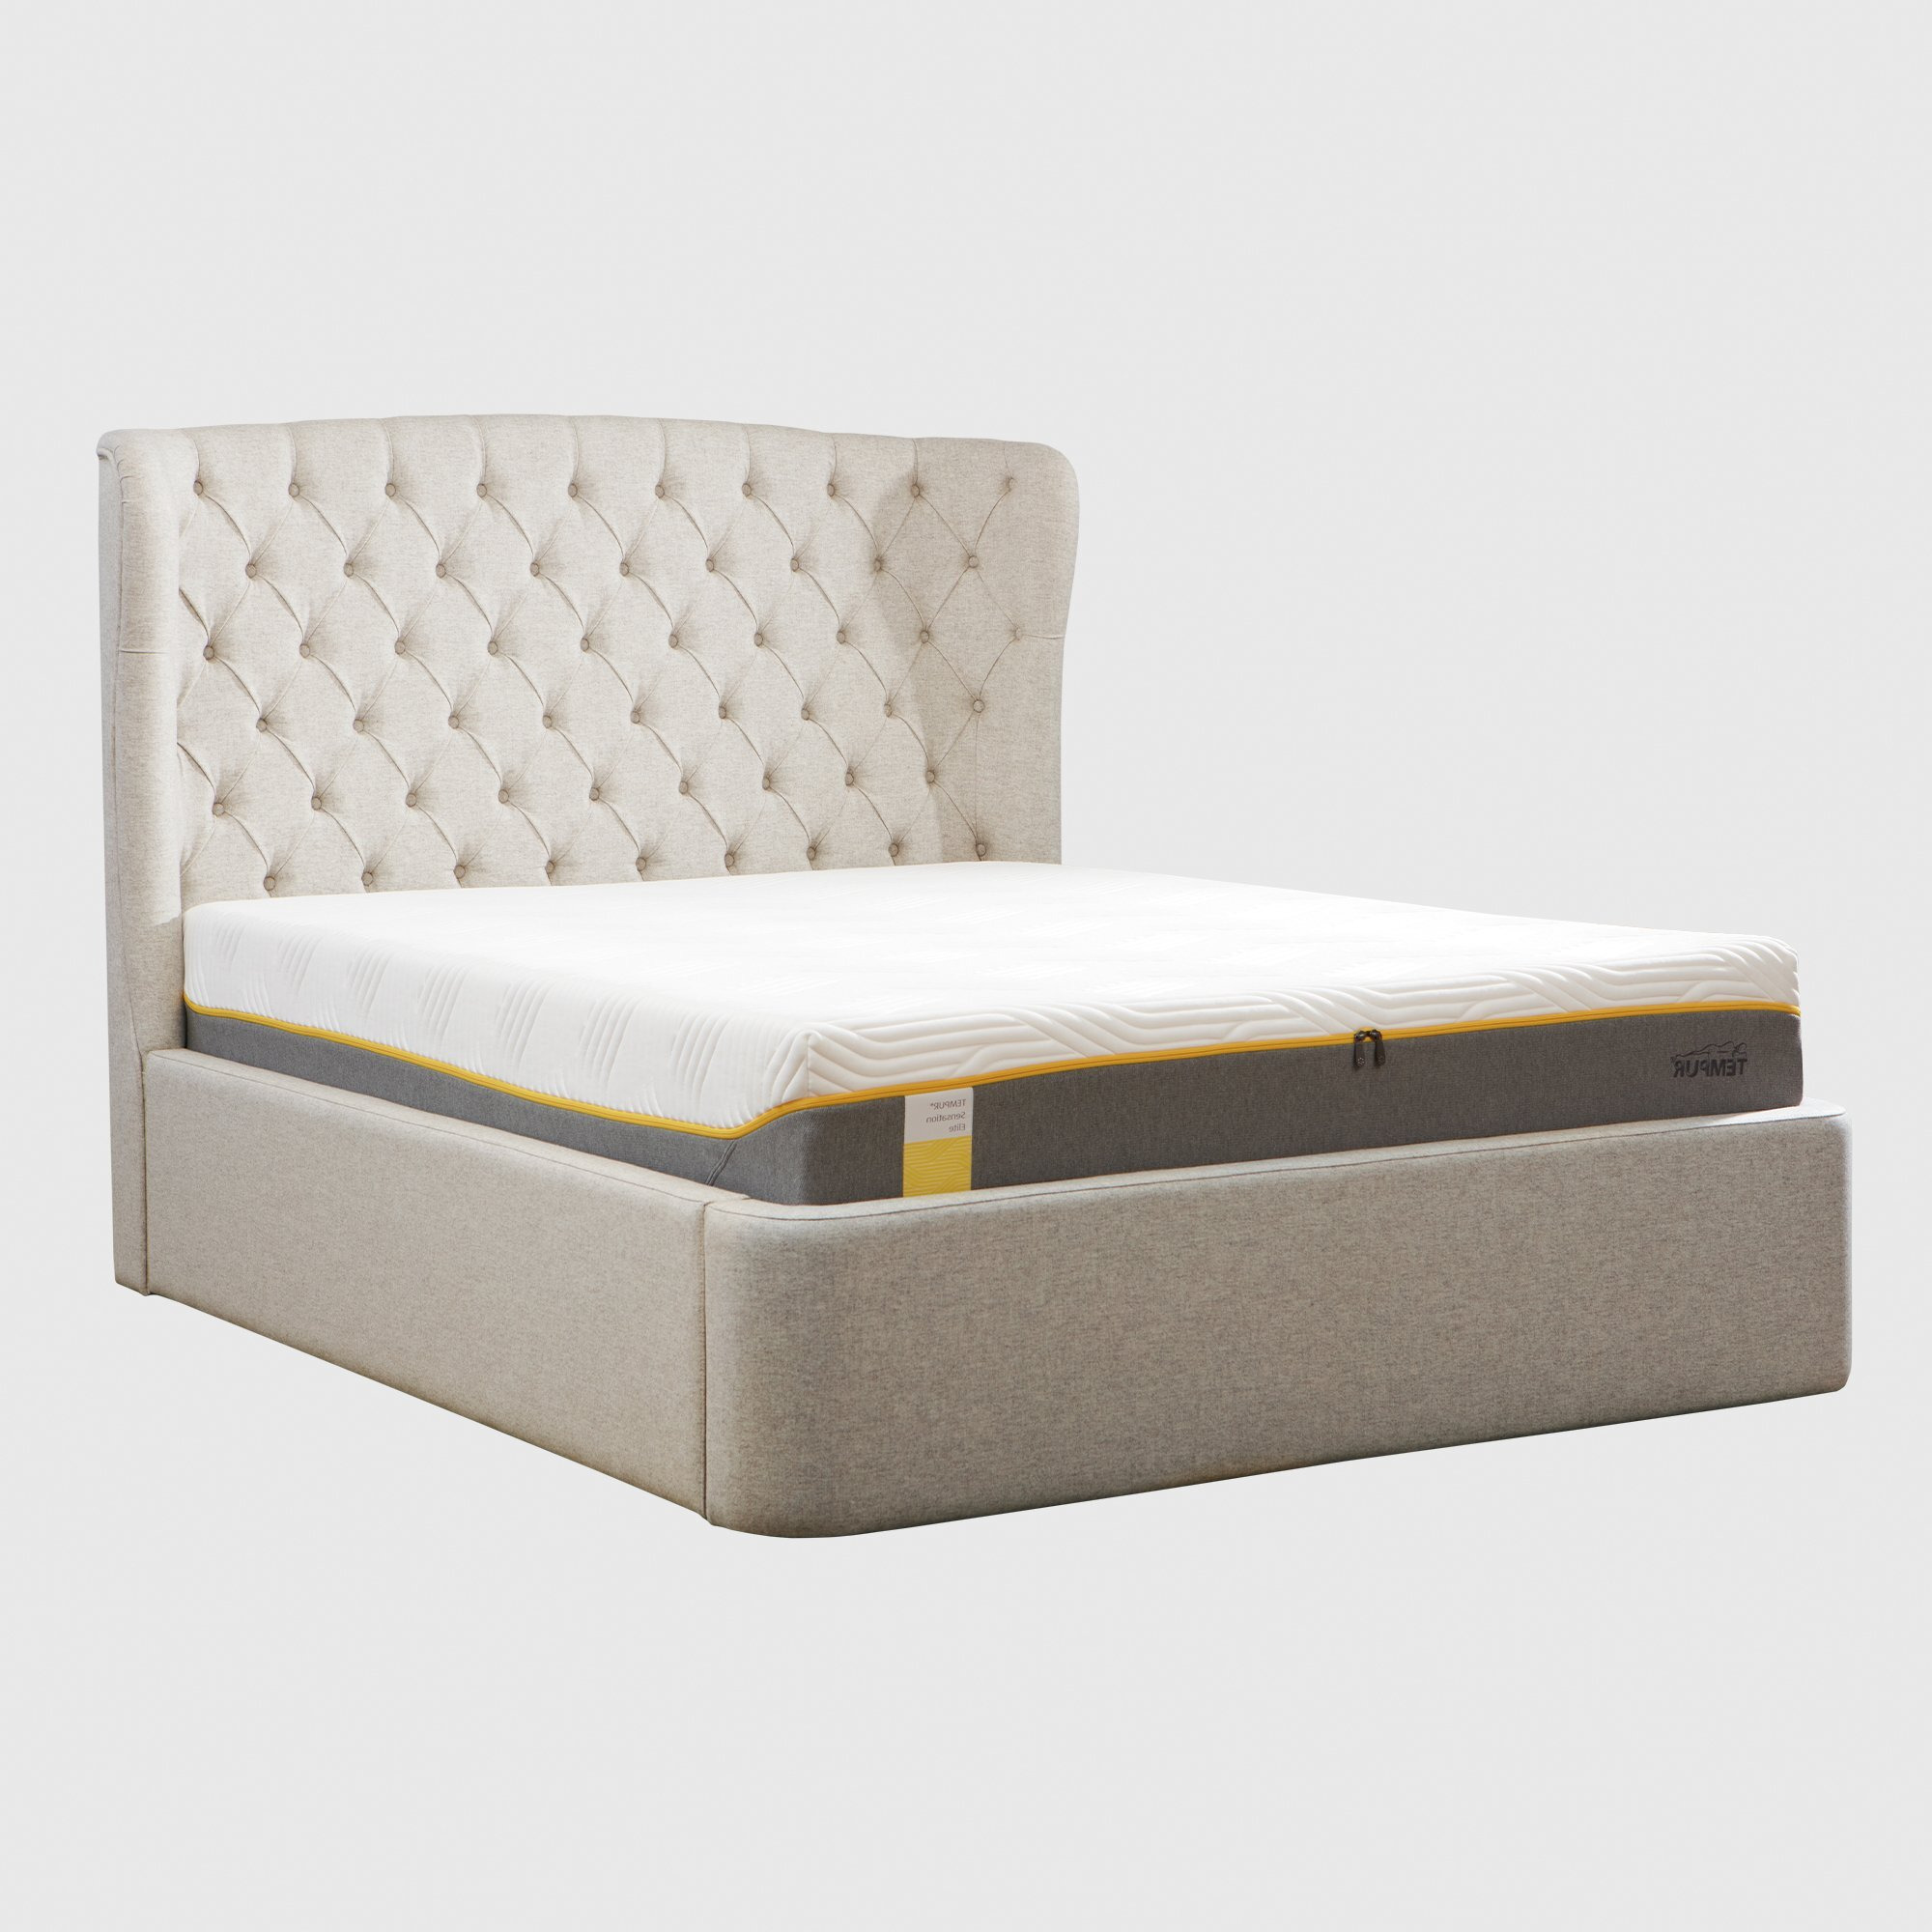 Tempur Holcot Ottoman 180x200cm Bed, Neutral Fabric - Super King - Barker & Stonehouse - image 1